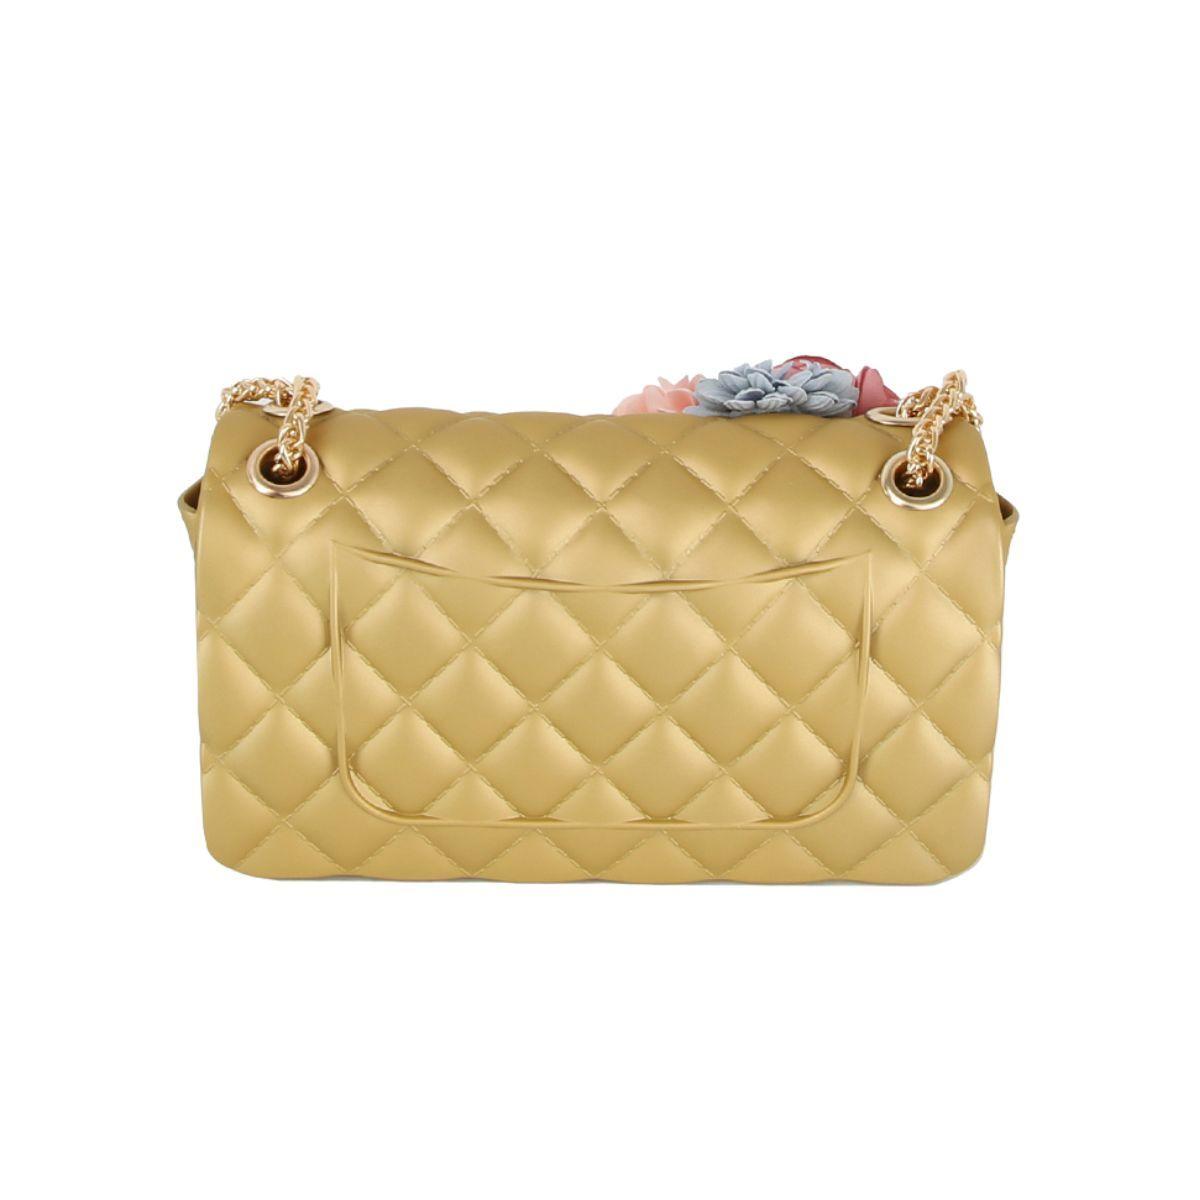 Make a Statement with a Stunning Gold Quilted Jelly Crossbody Mini Bag